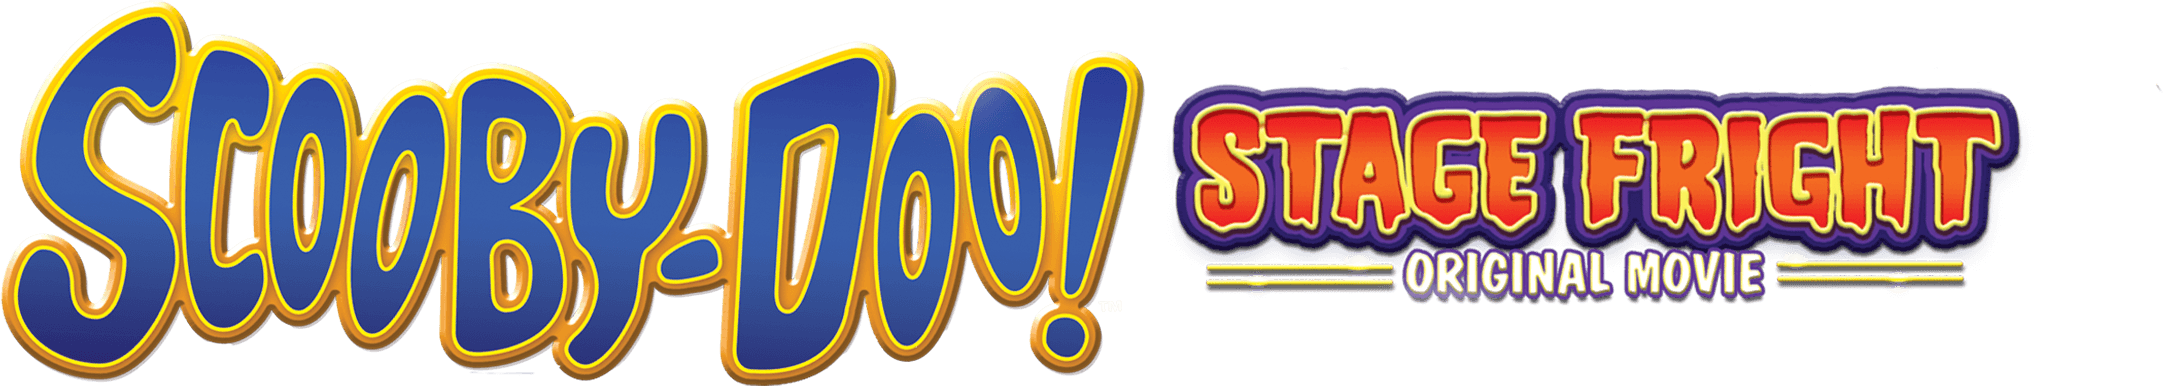 Scooby-Doo! Stage Fright logo